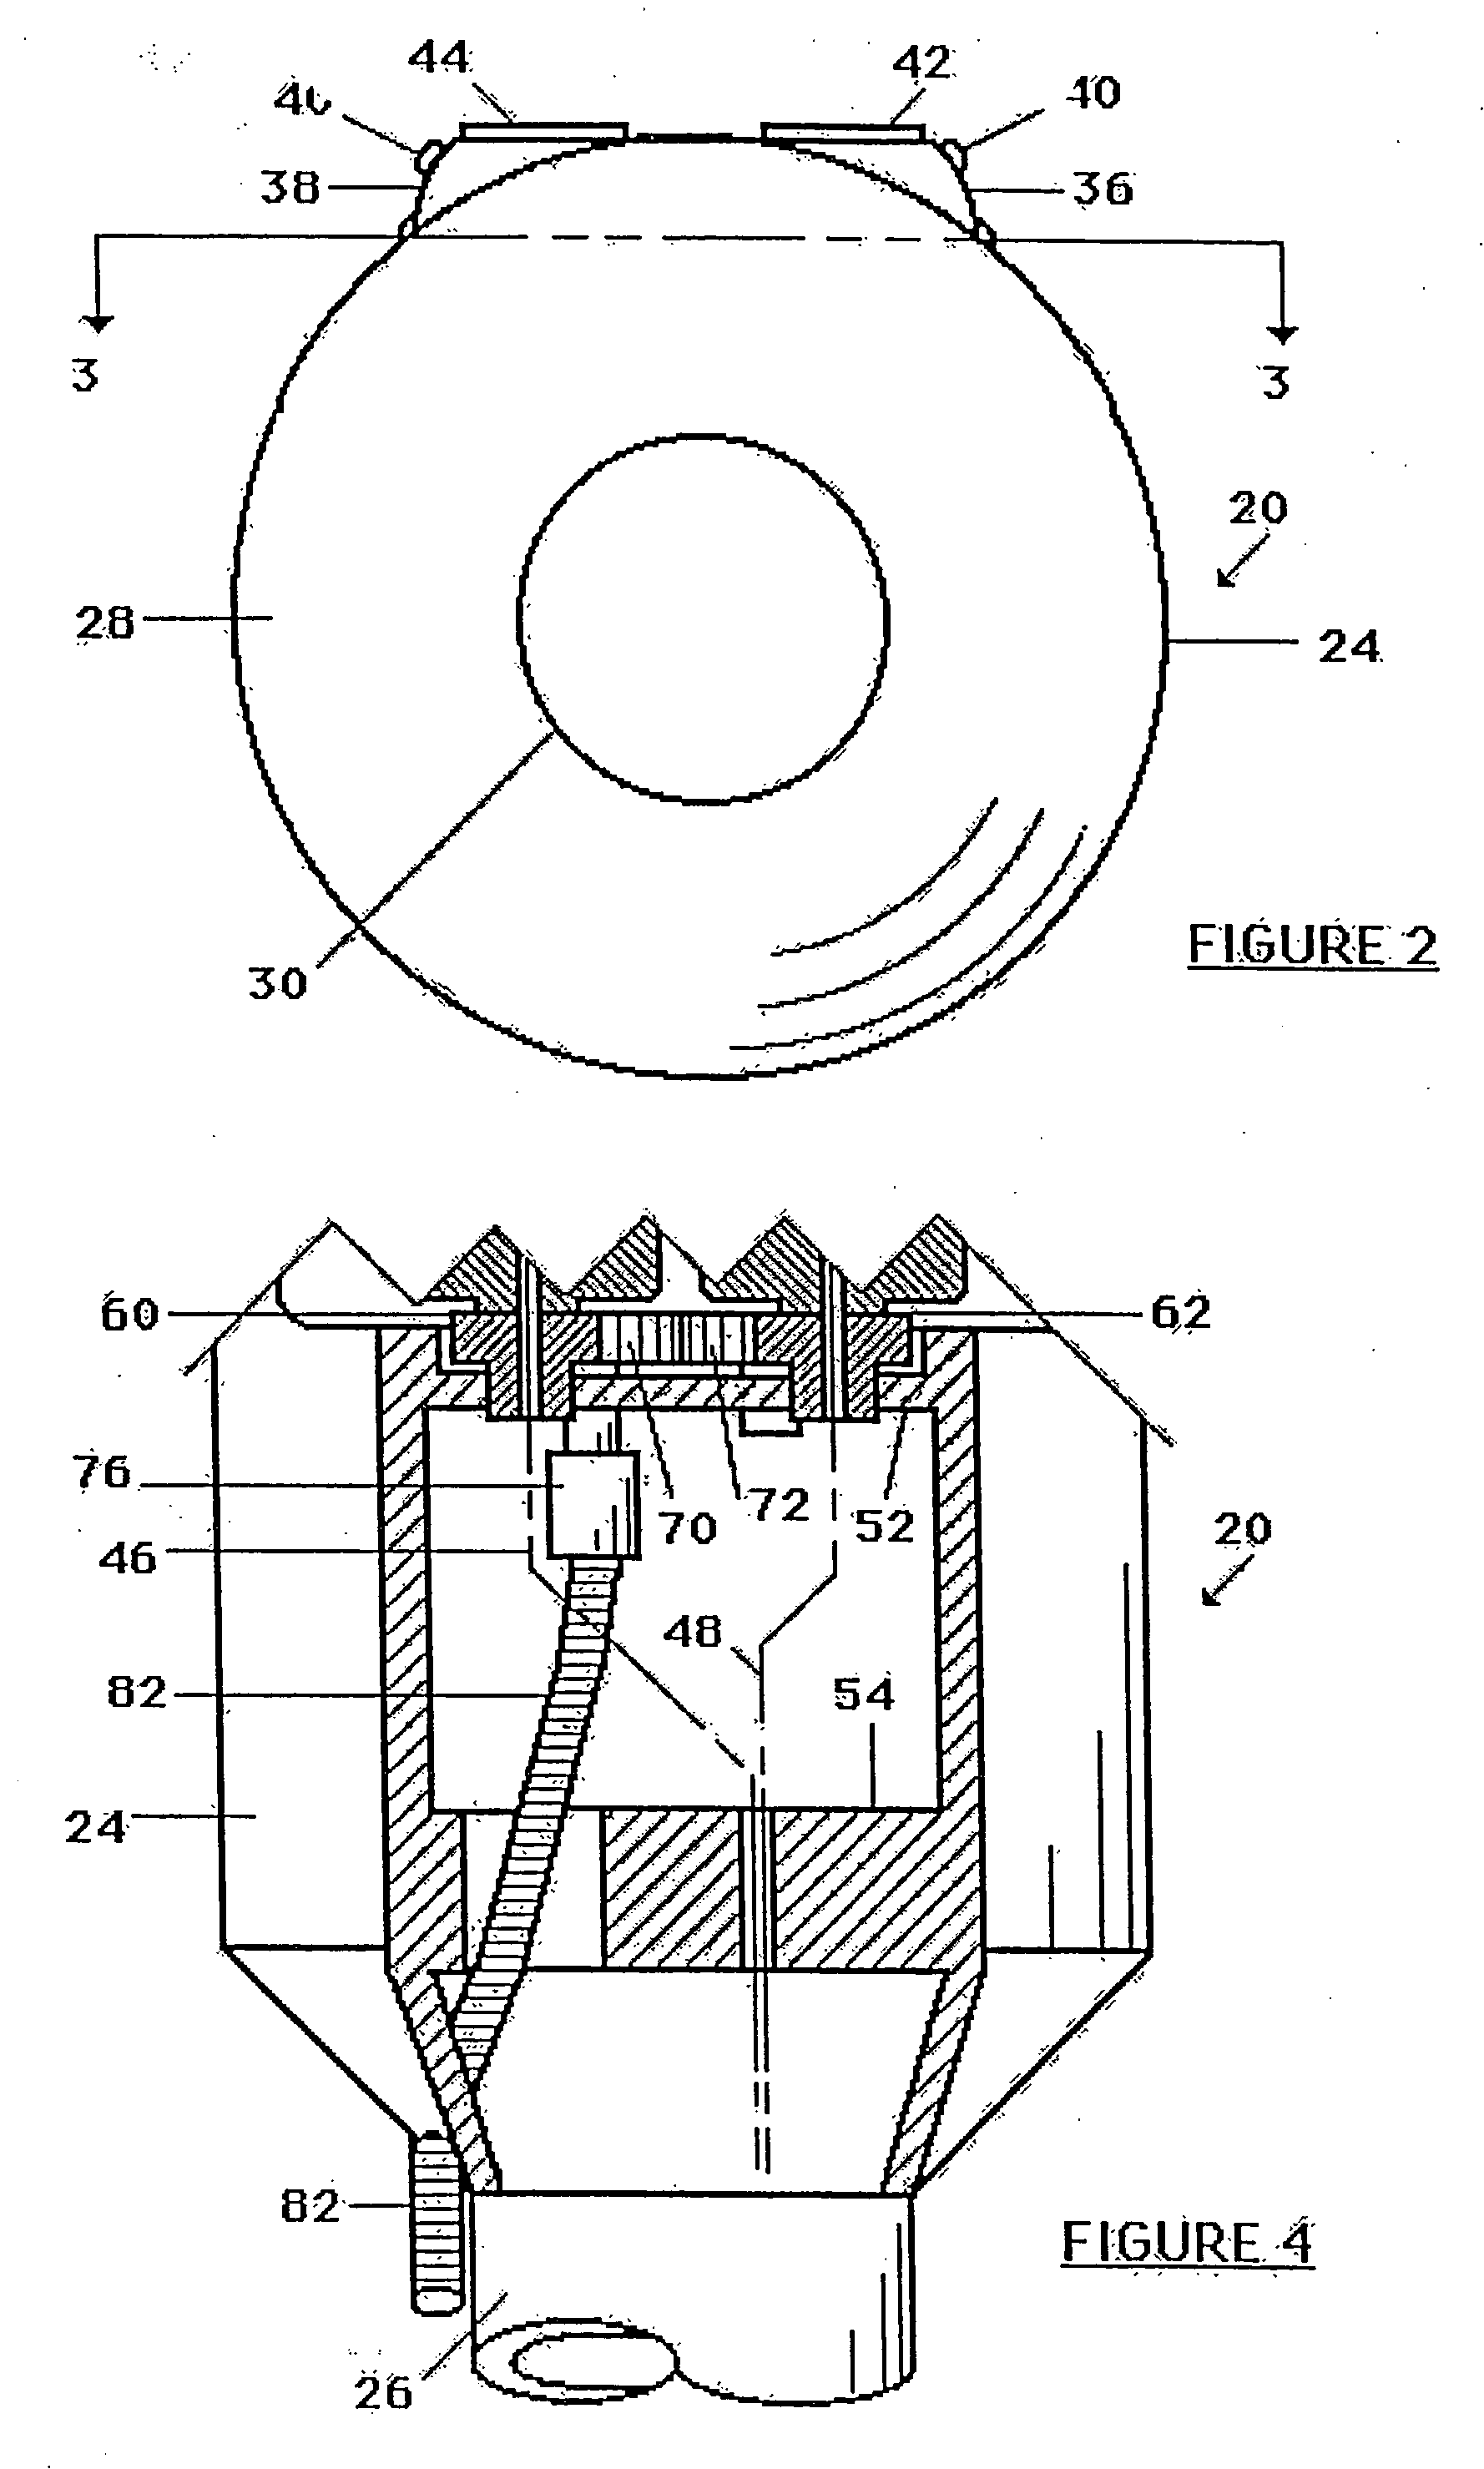 RF ablation device and method of use